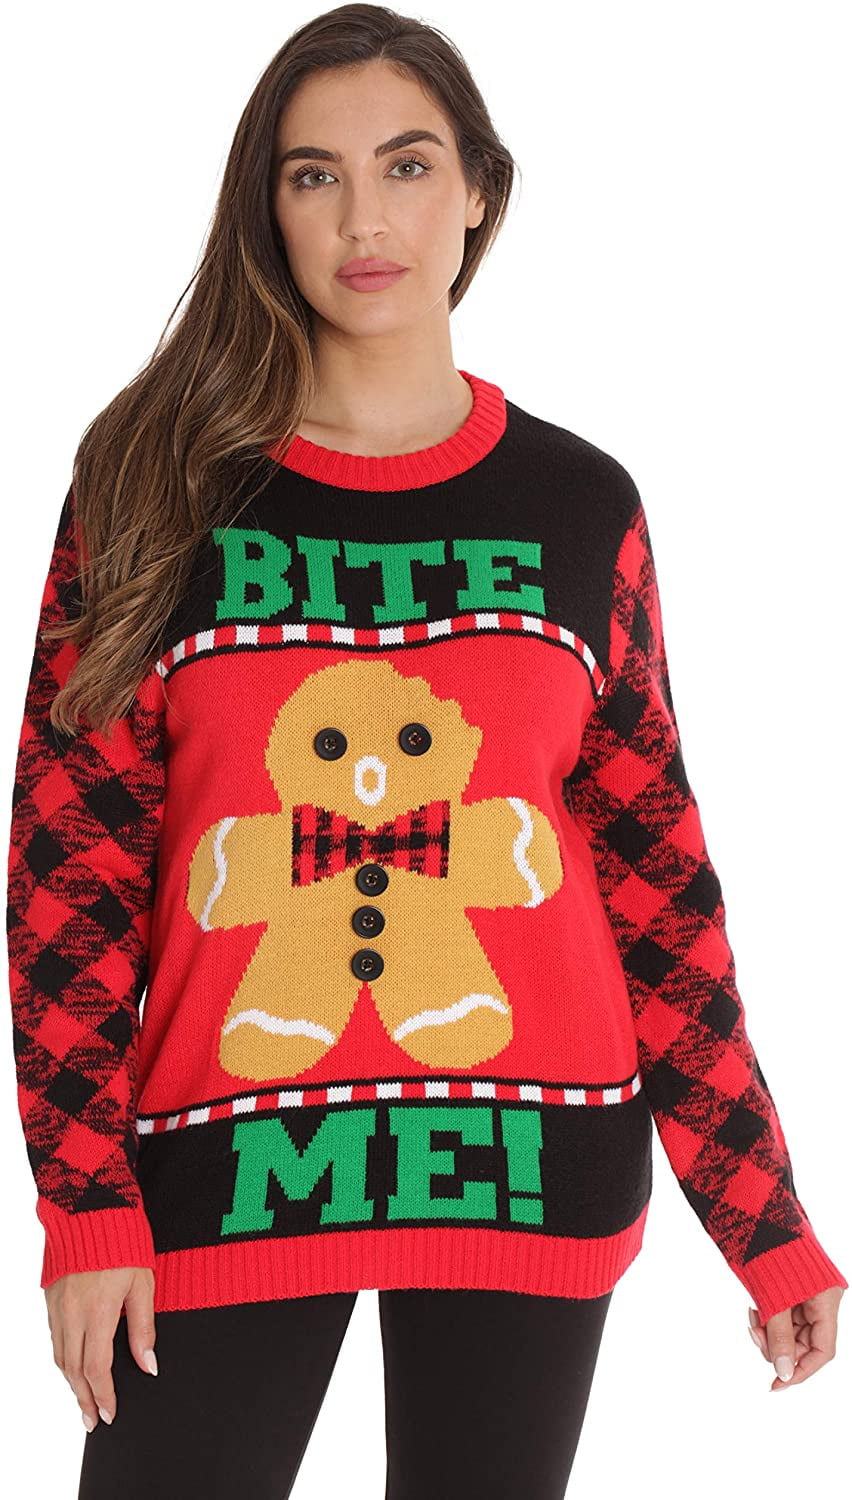 # Womens Ugly Christmas Sweater - Sweaters for Women | Walmart Canada